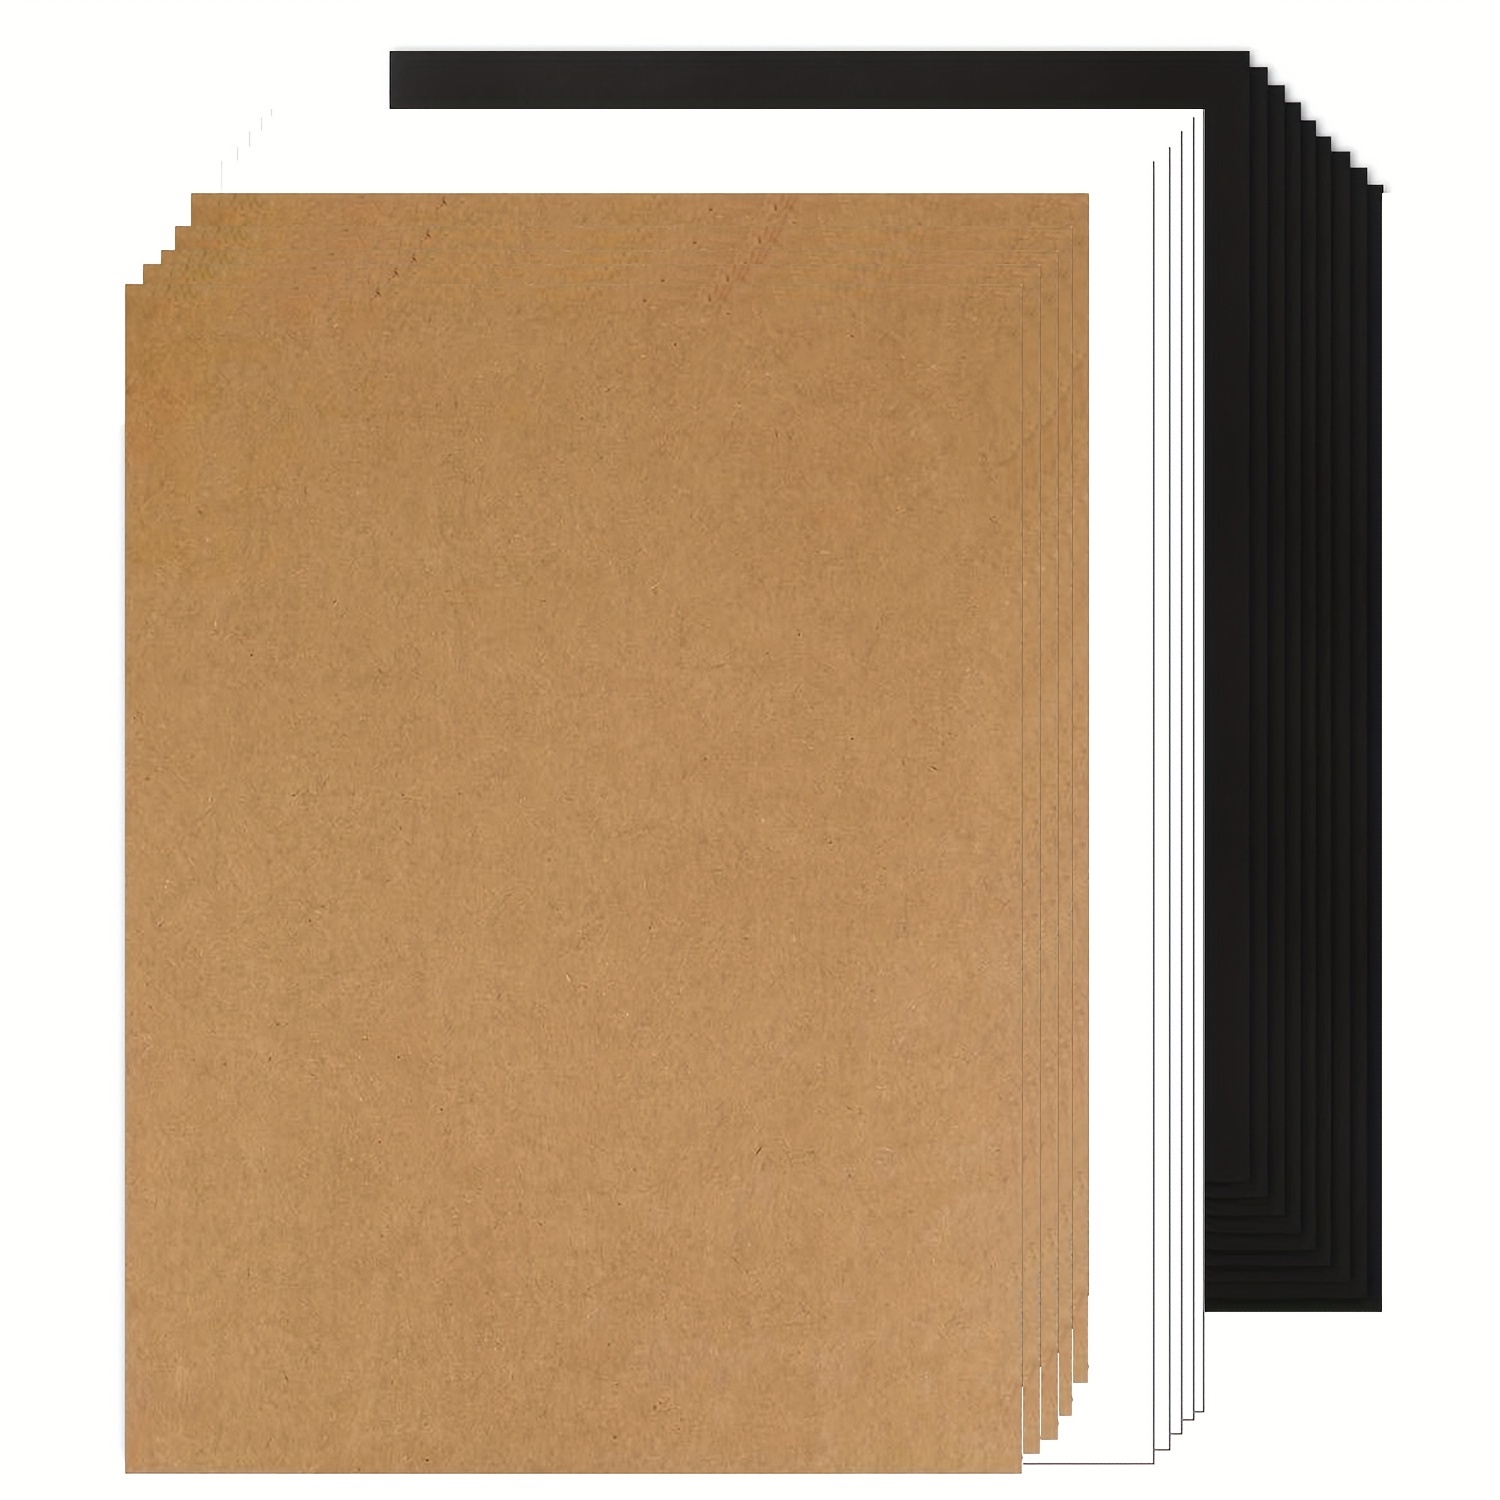 Black Gold and White 8.5 x 11 Color Thick Card Stock Paper Sheets Bulk  Set, Make Your Own Art & Crafts Greetings & Invitations, Gift Tags, | 25  Gold